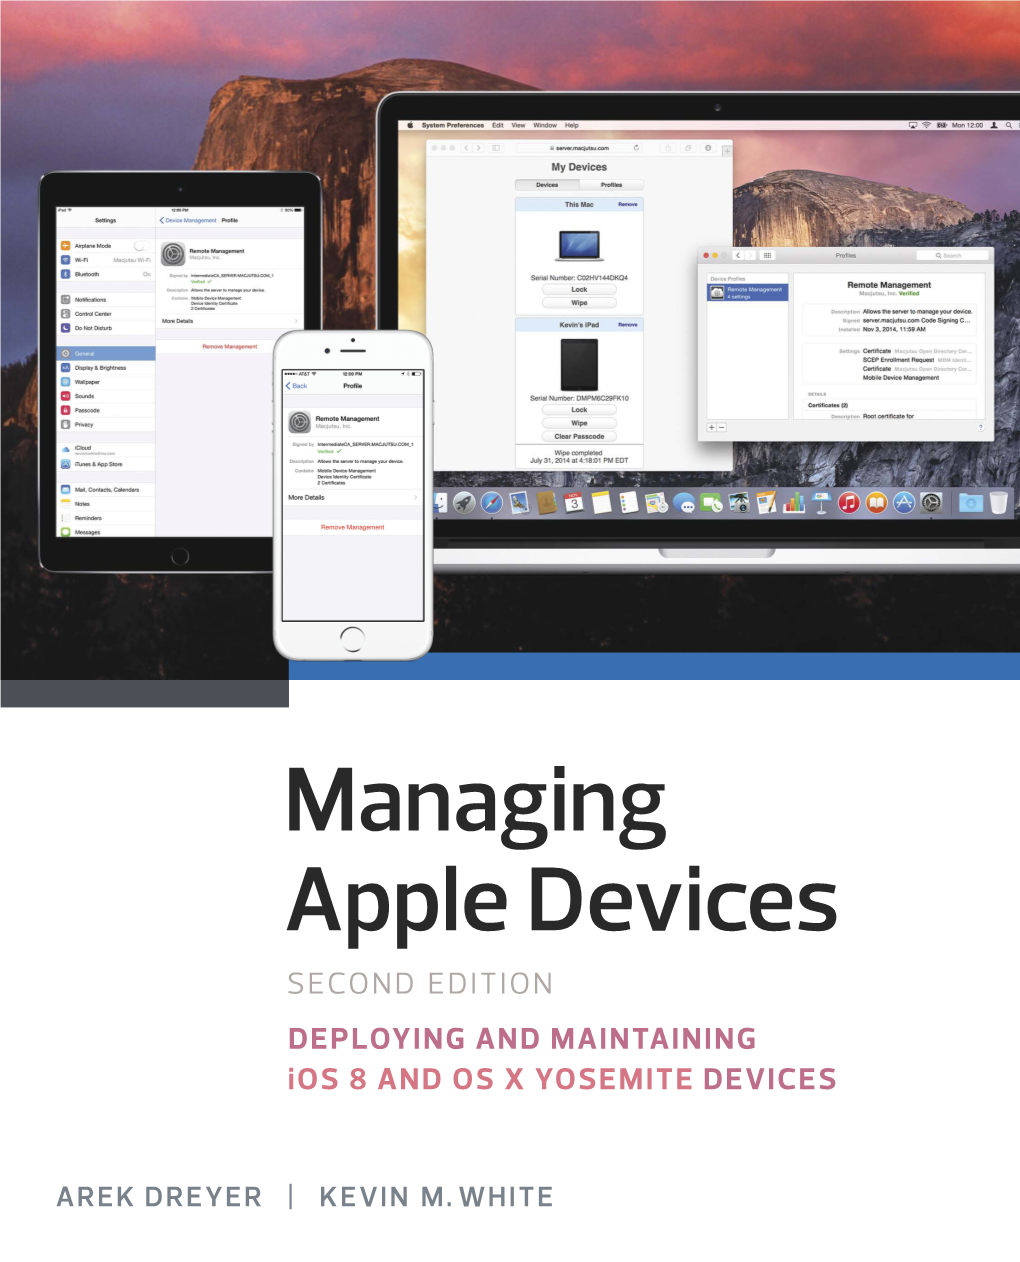 Deploying and Maintaining Ios and OS X Devices